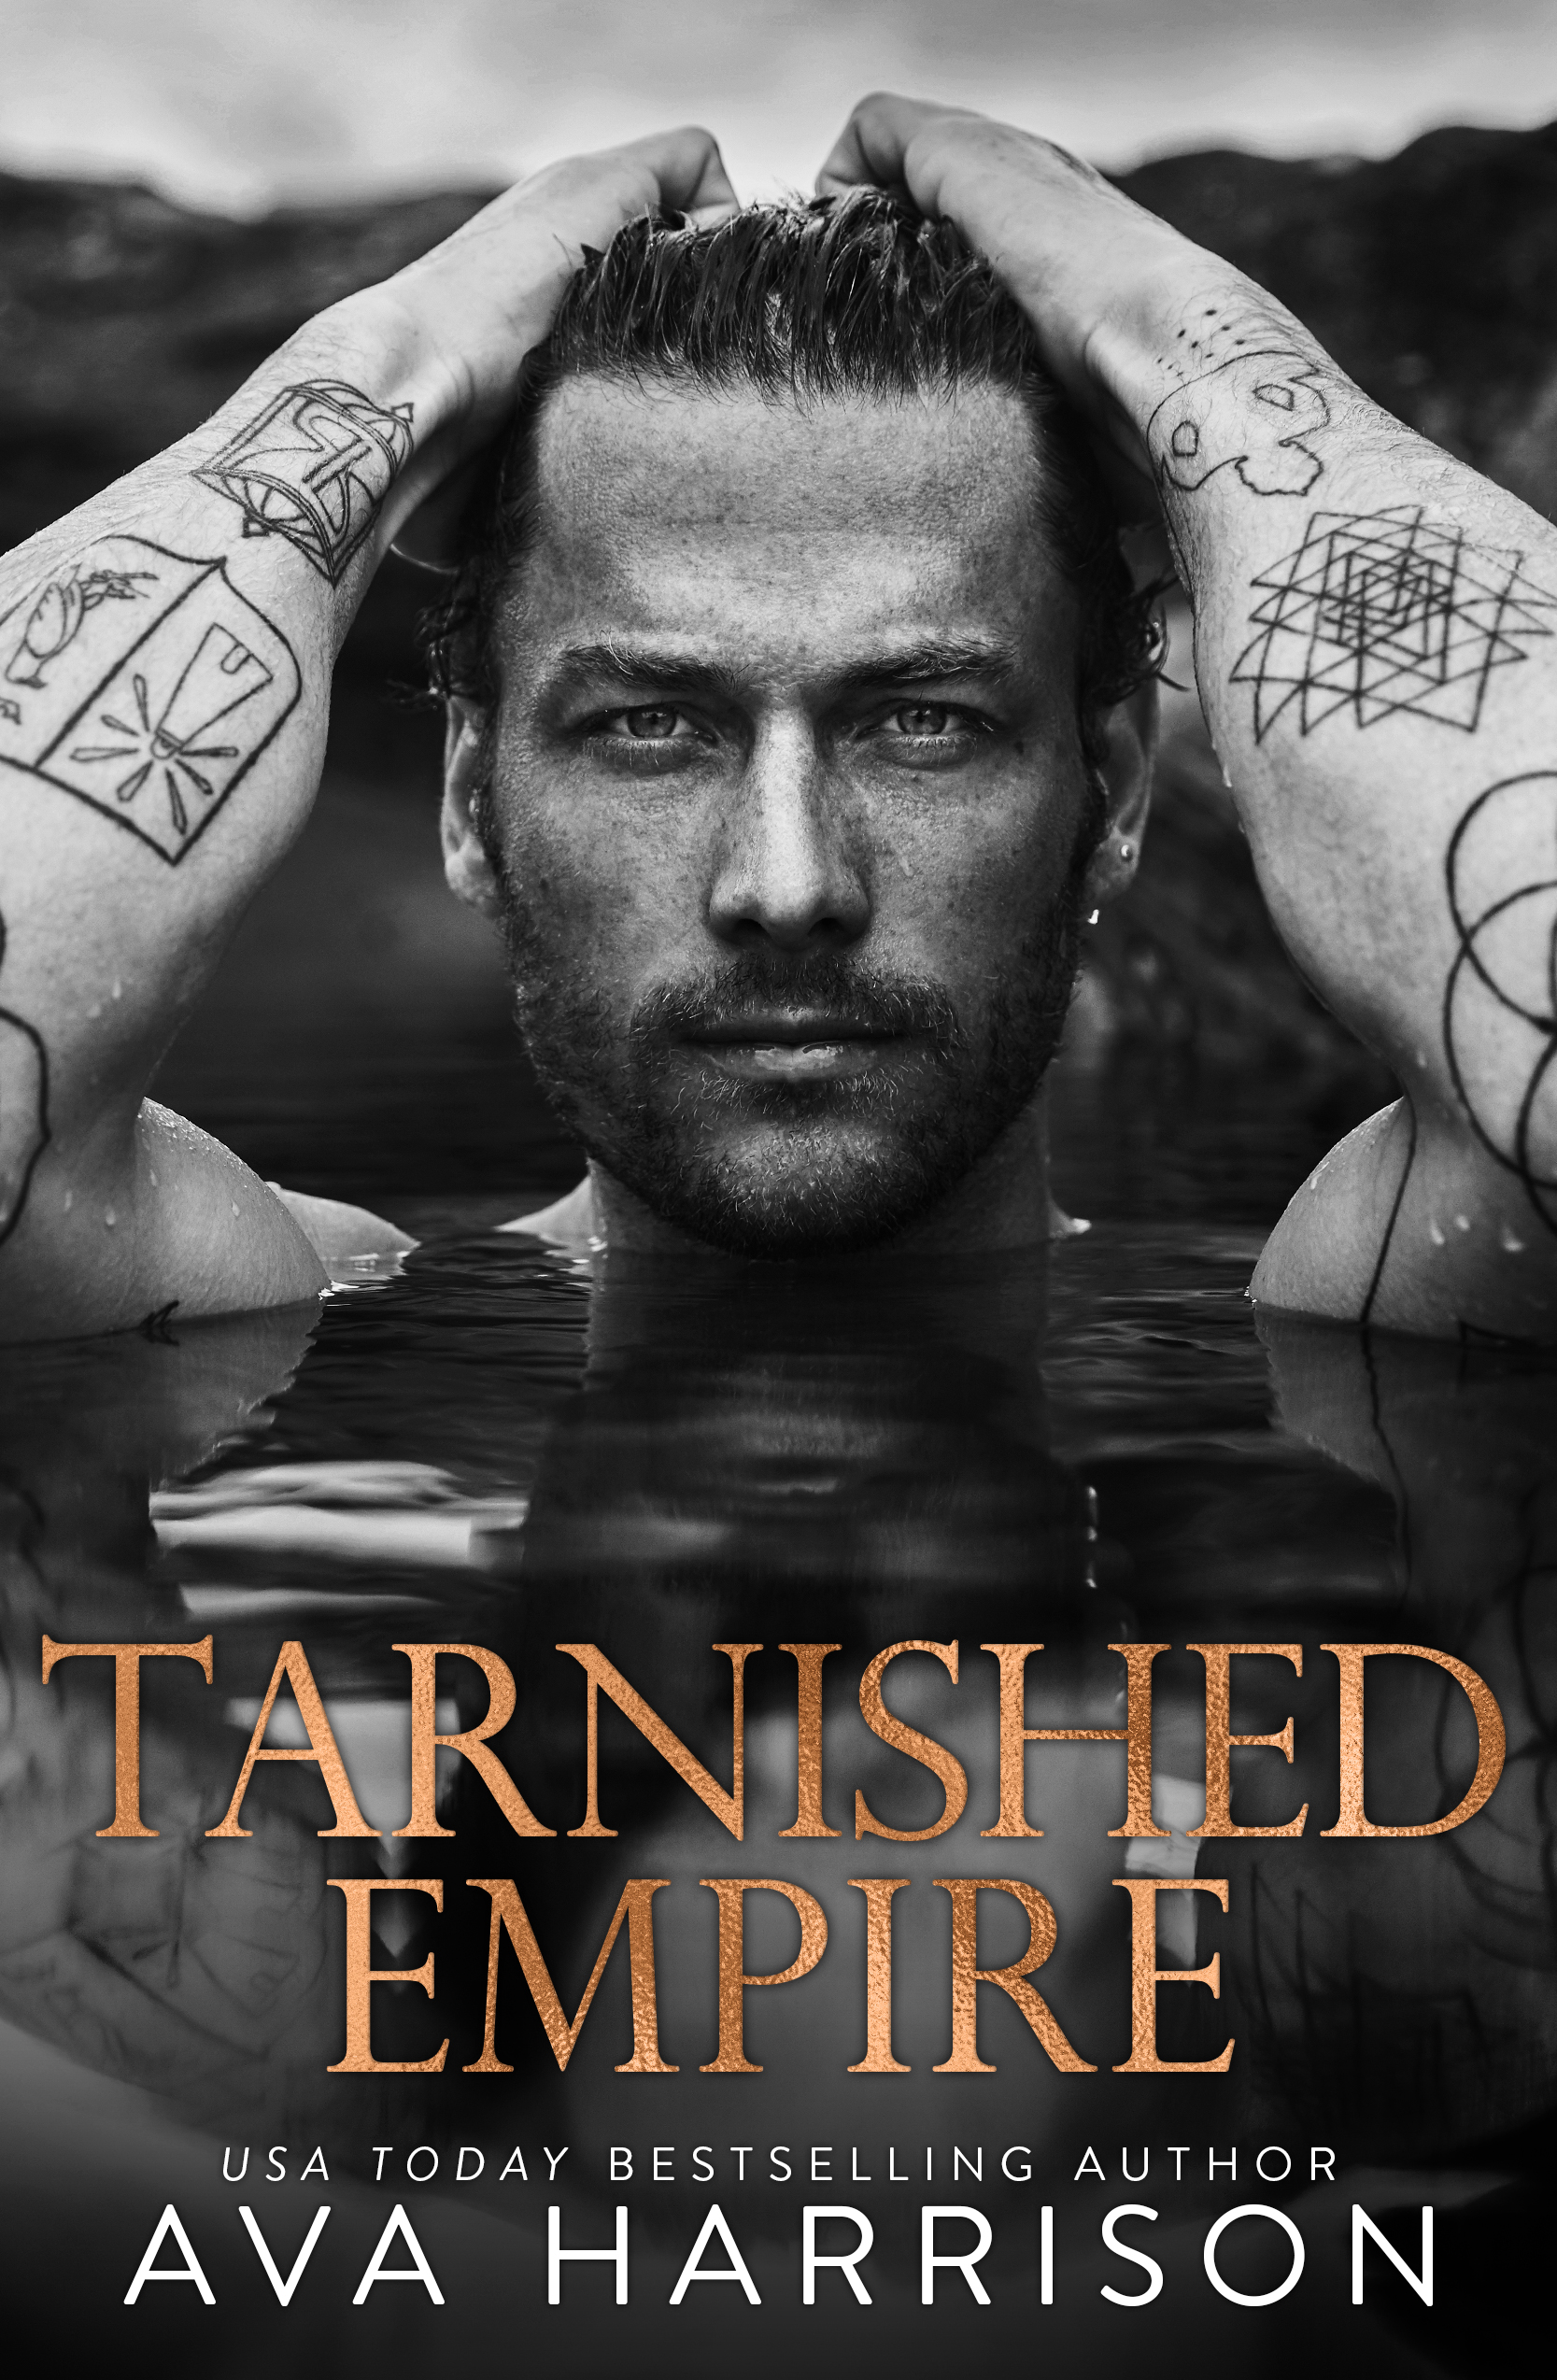 Tarnished Empire by Ava Harrison